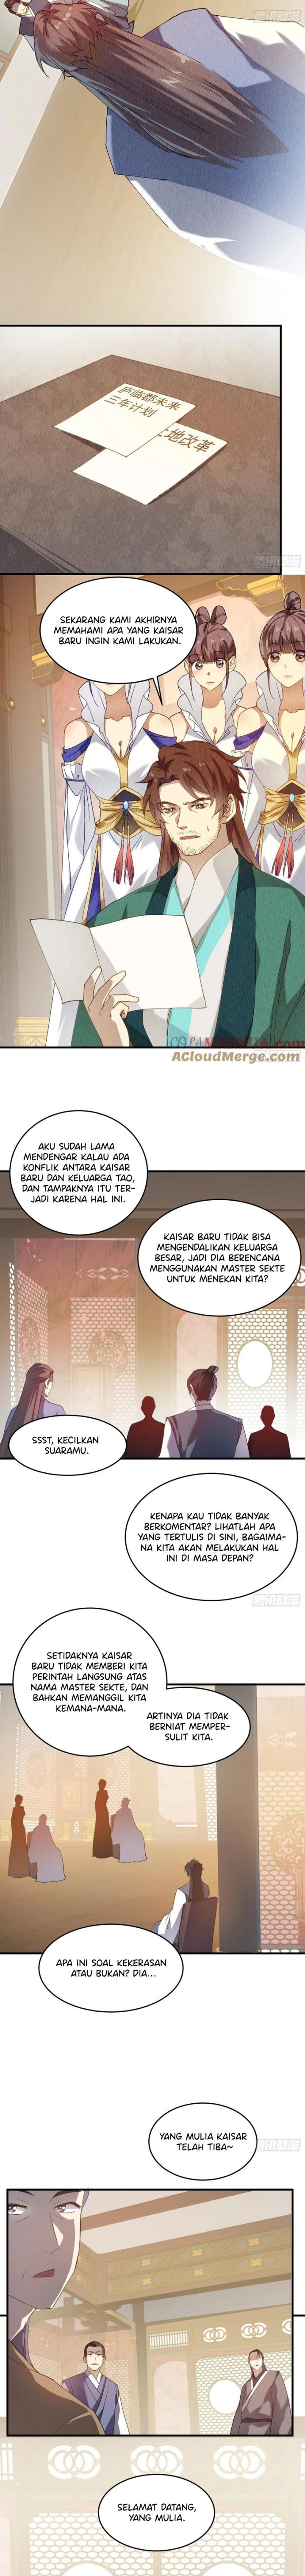 Dilarang COPAS - situs resmi www.mangacanblog.com - Komik i just dont play the card according to the routine 212 - chapter 212 213 Indonesia i just dont play the card according to the routine 212 - chapter 212 Terbaru 4|Baca Manga Komik Indonesia|Mangacan